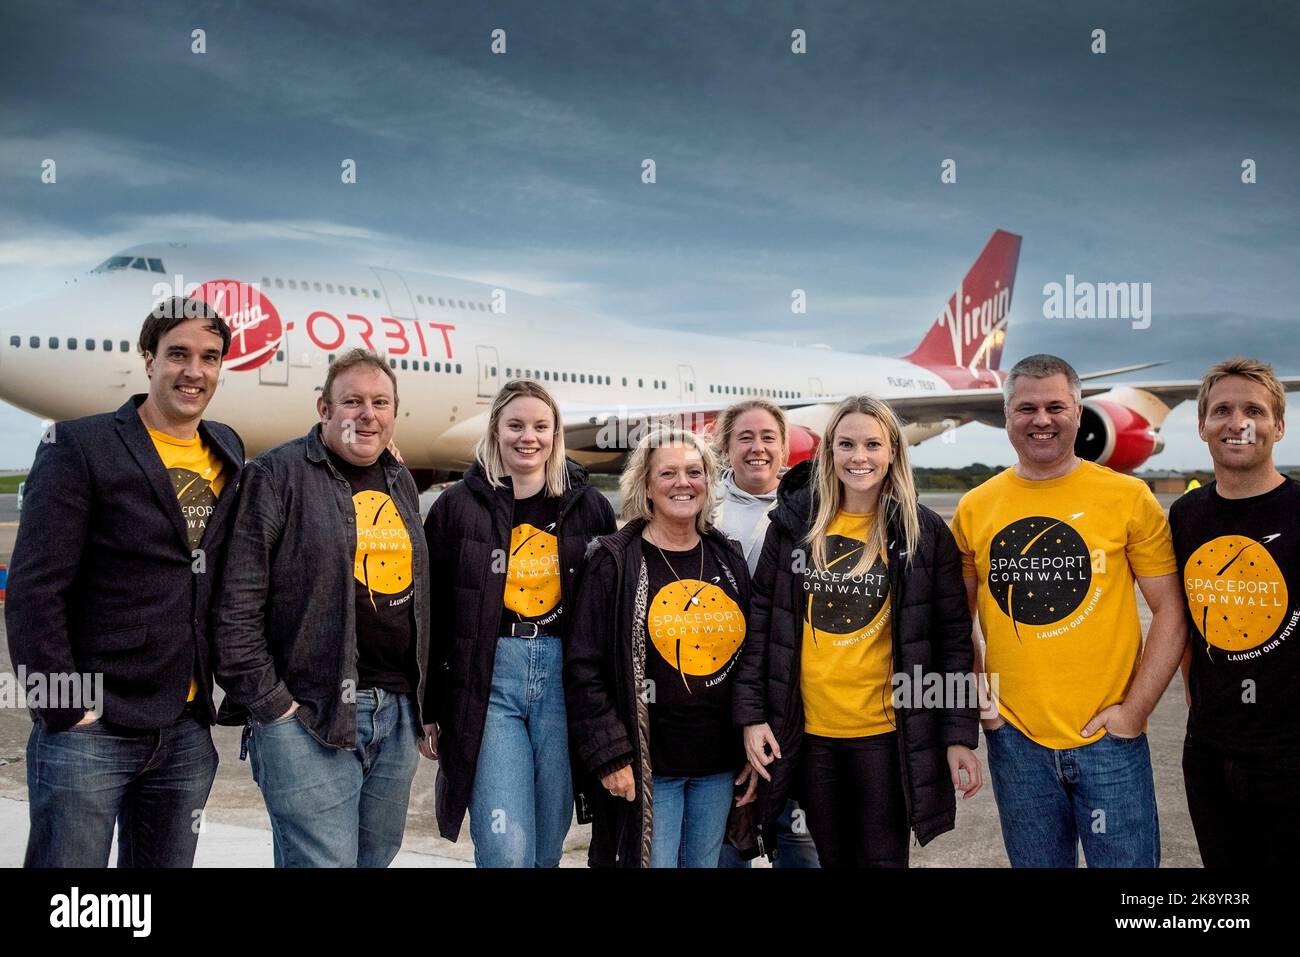 A delighted Melissa Thorpe, Director of Spaceport Cornwall (3rd from the right) and some of her team celebrate the arrival of Virgin Orbit, Cosmic Gir Stock Photo